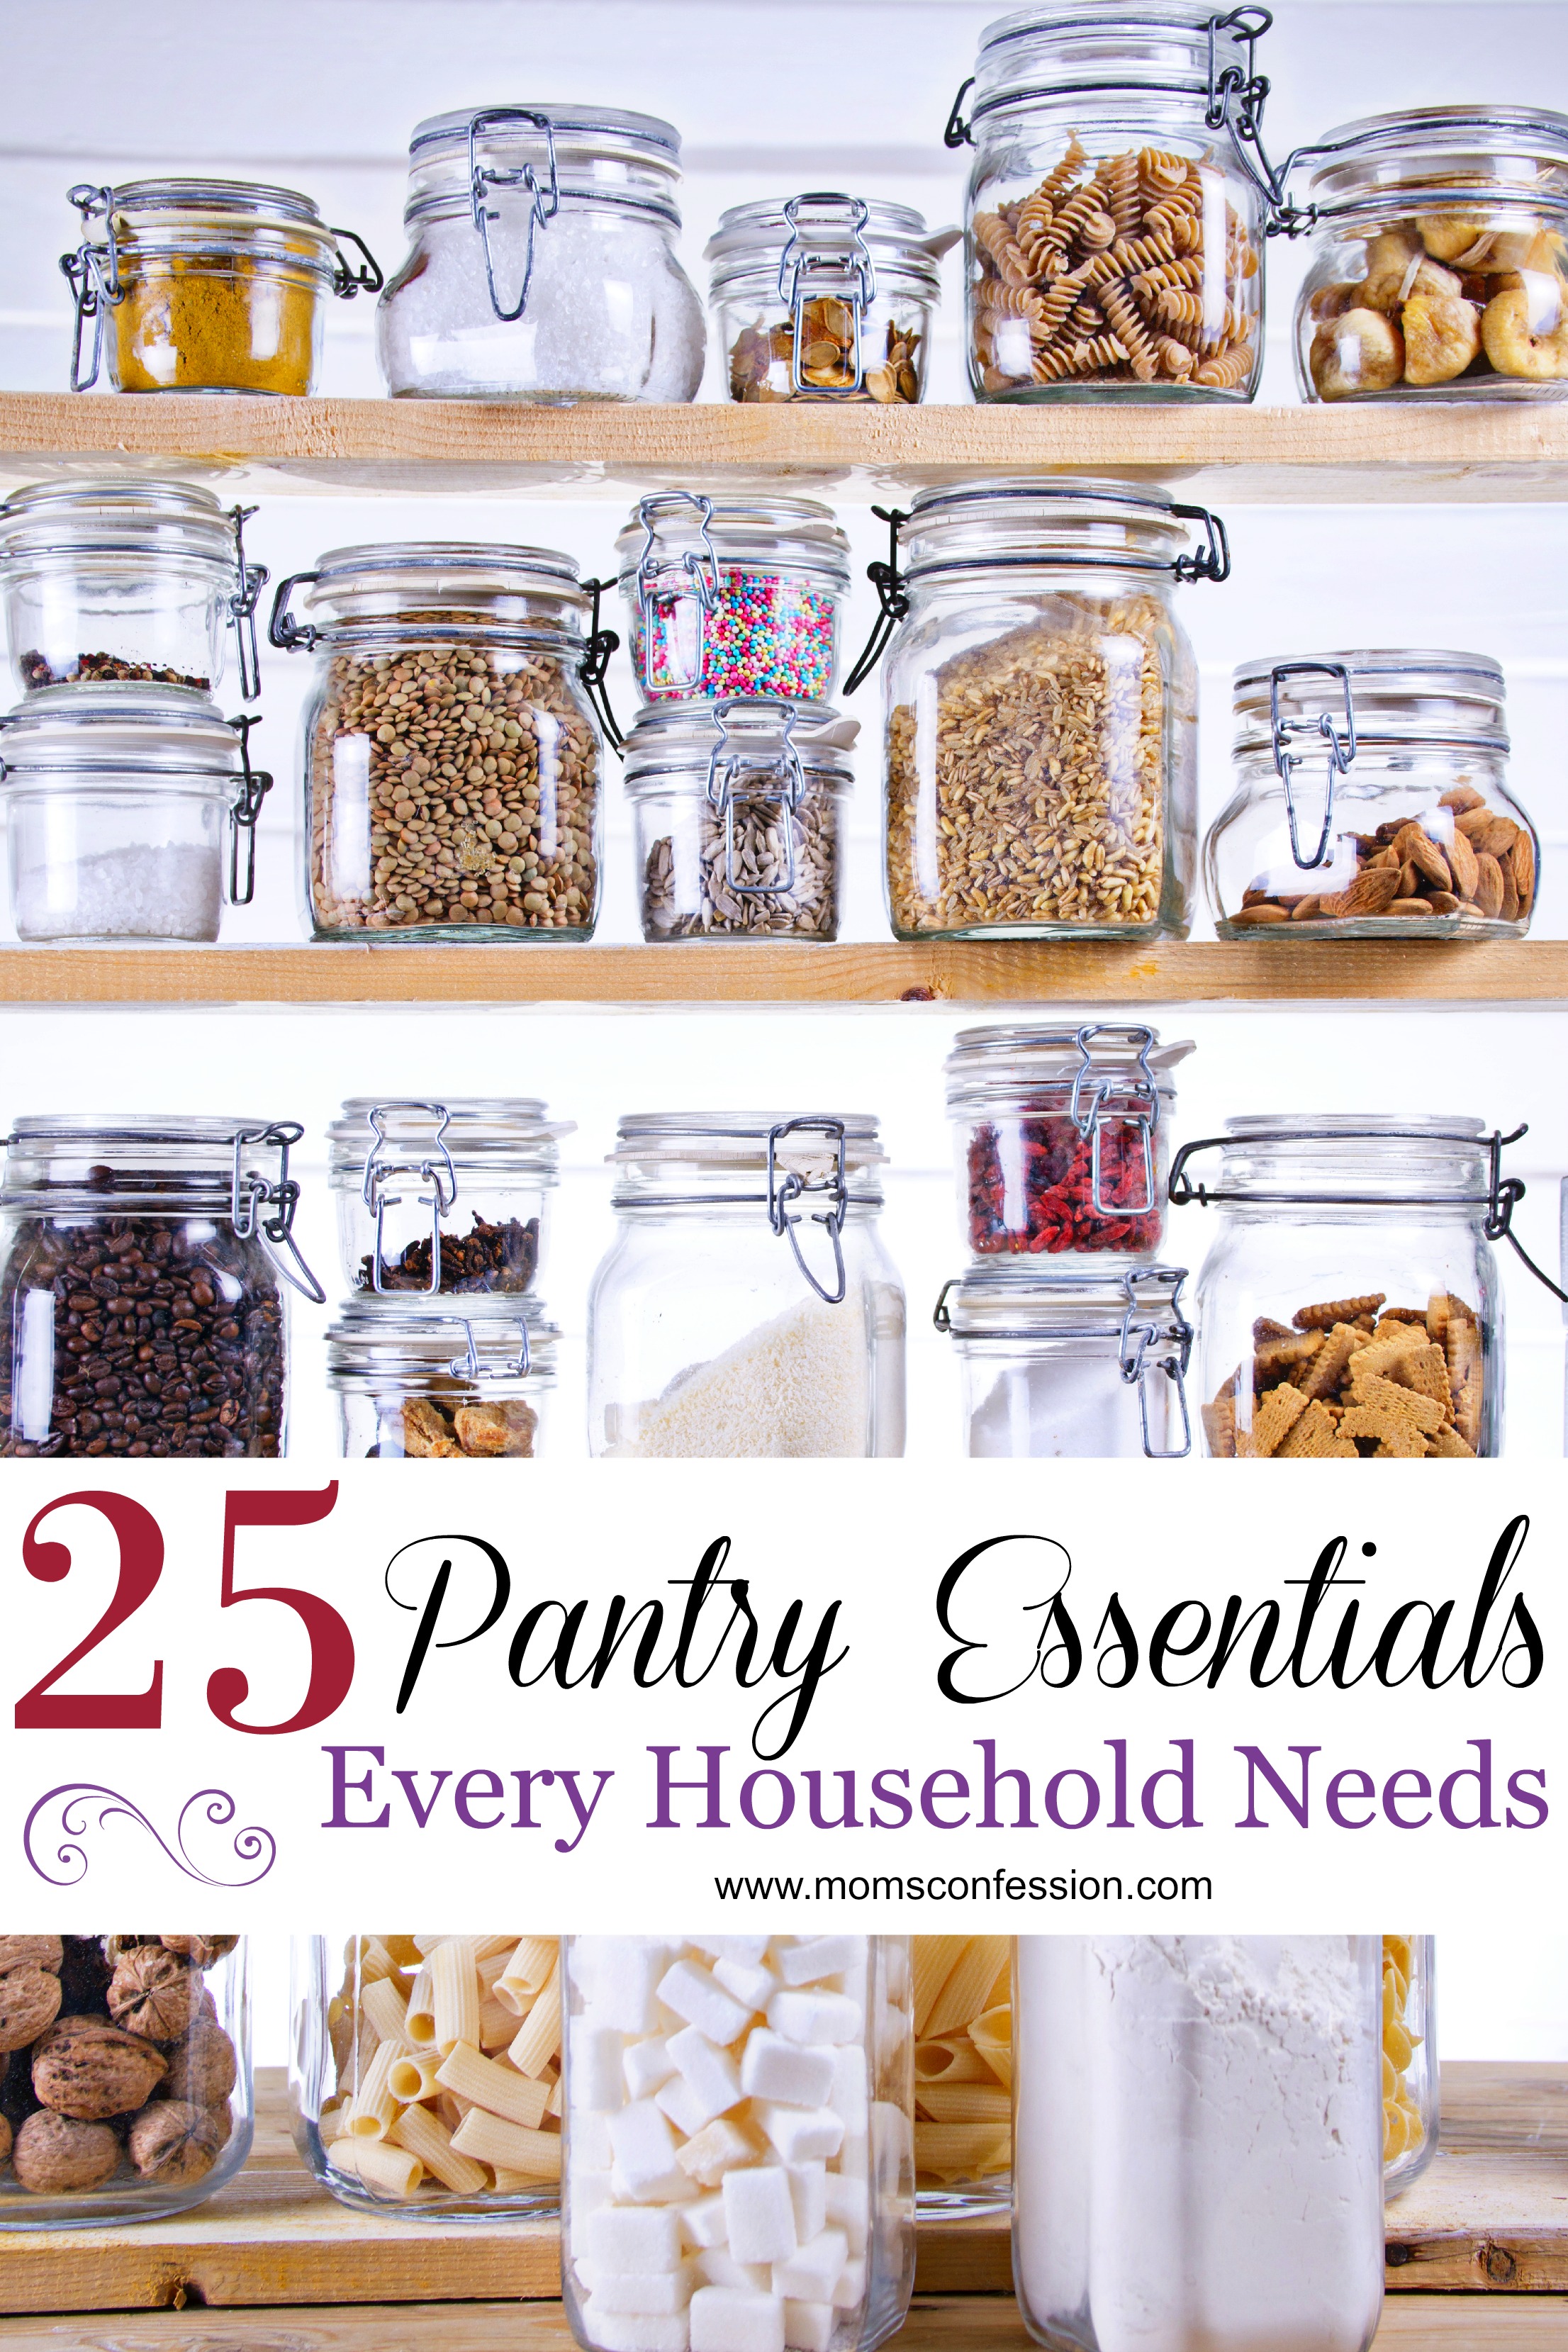 food pantry essentials starting with n